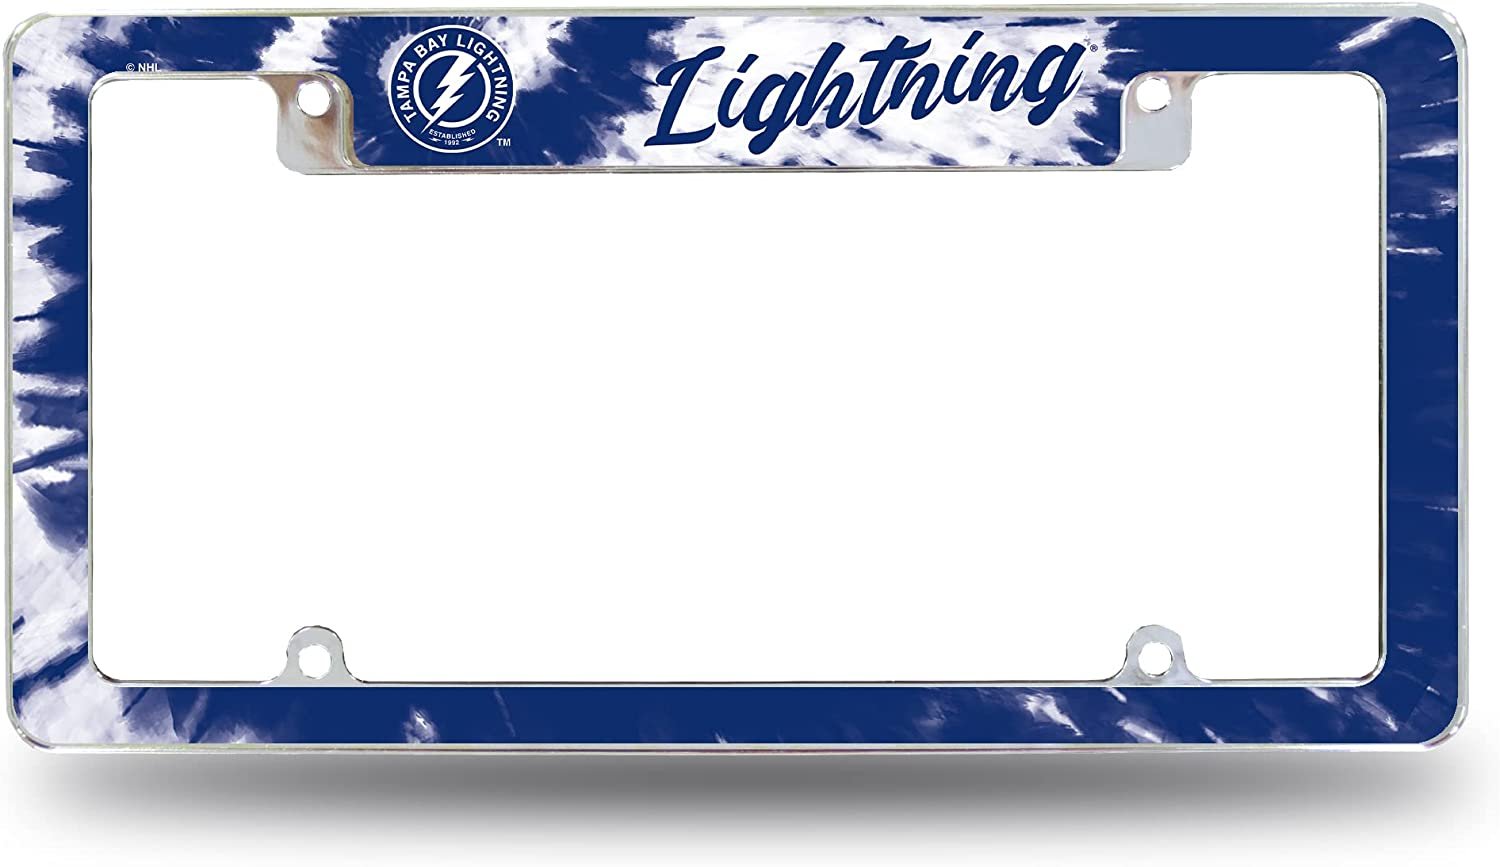 Tampa Bay Lightning Metal License Plate Frame Chrome Tag Cover Tie Dye Design 6x12 Inch